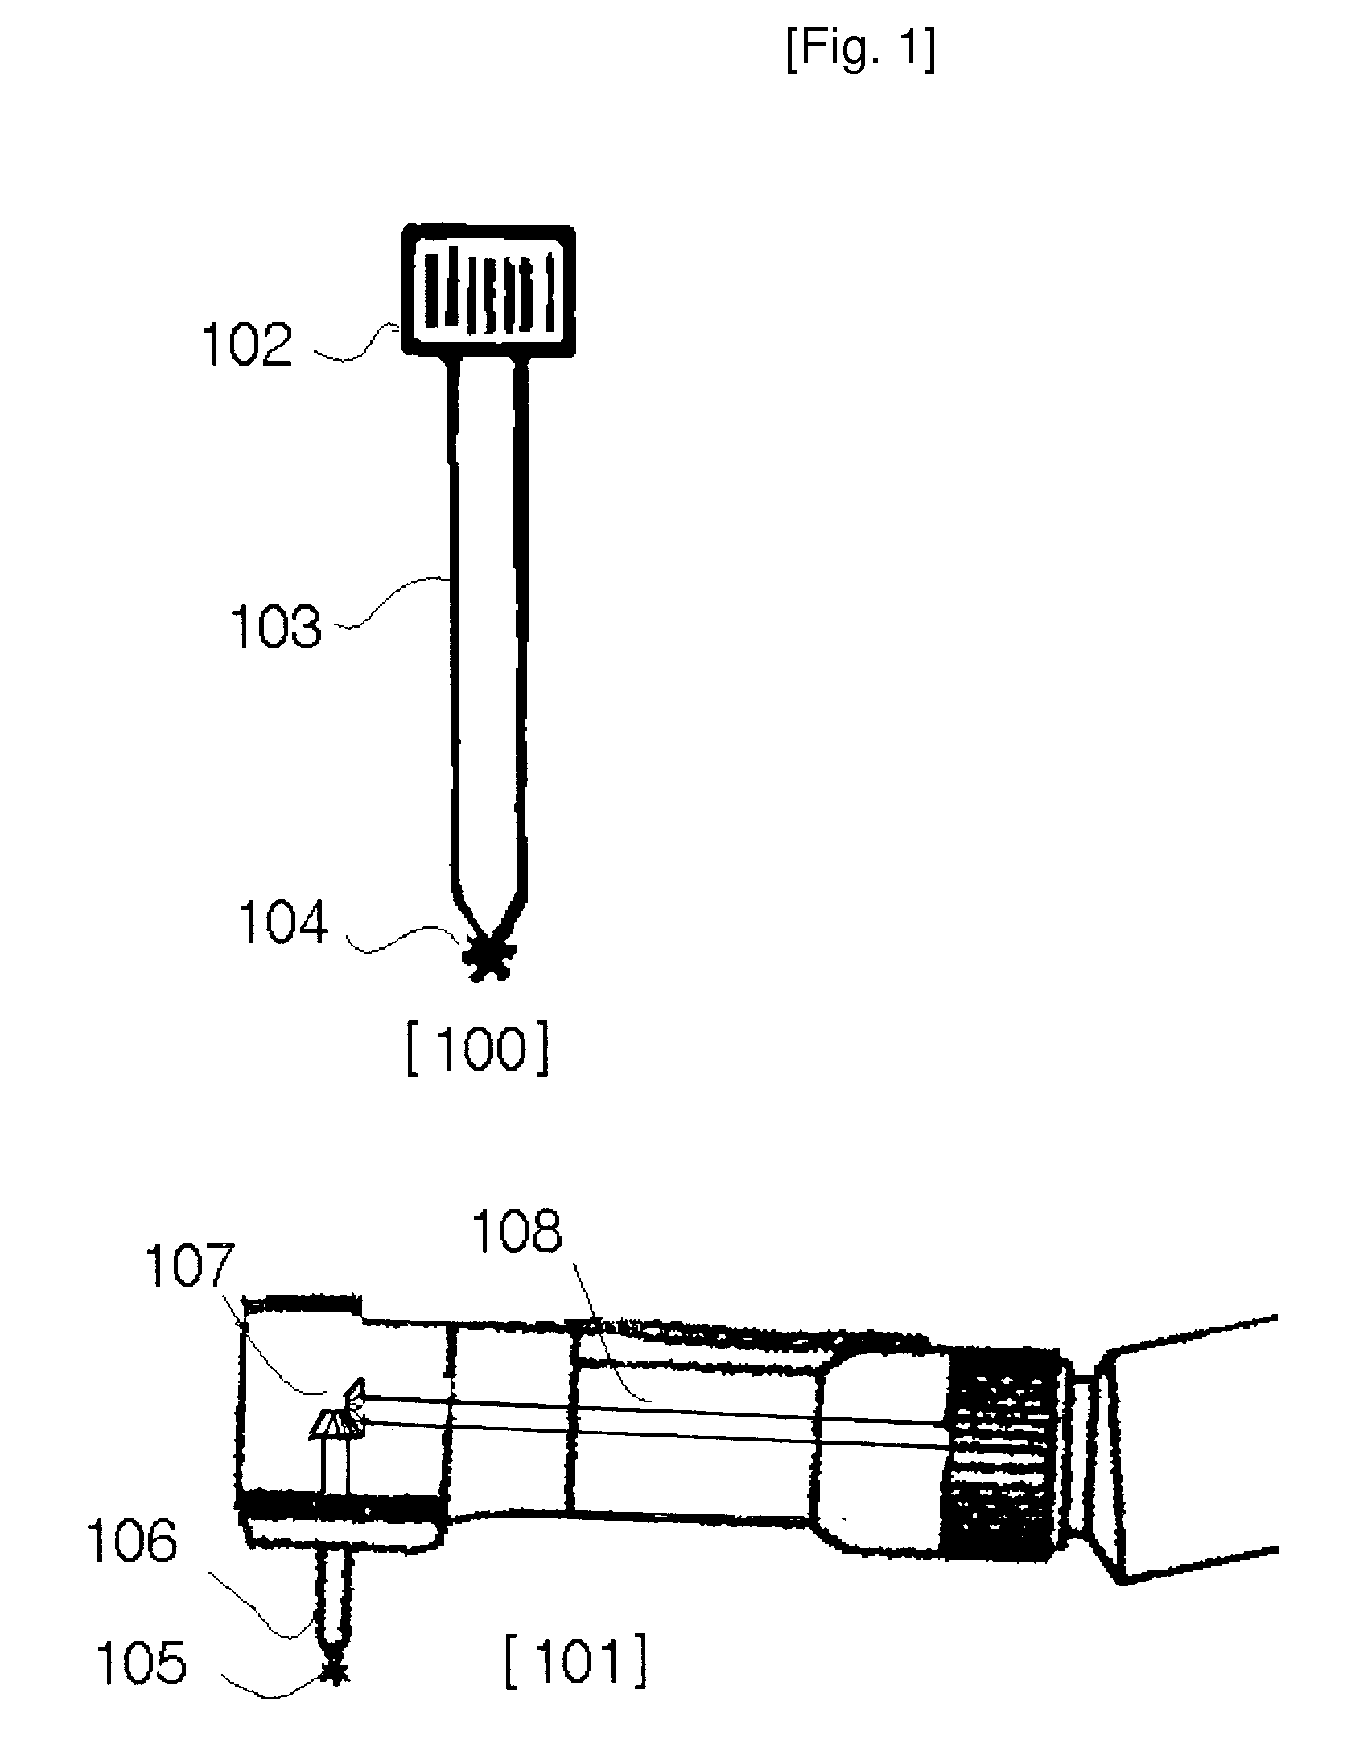 Free Angled Implant Driver and Free Angled Hole Implant Abutment